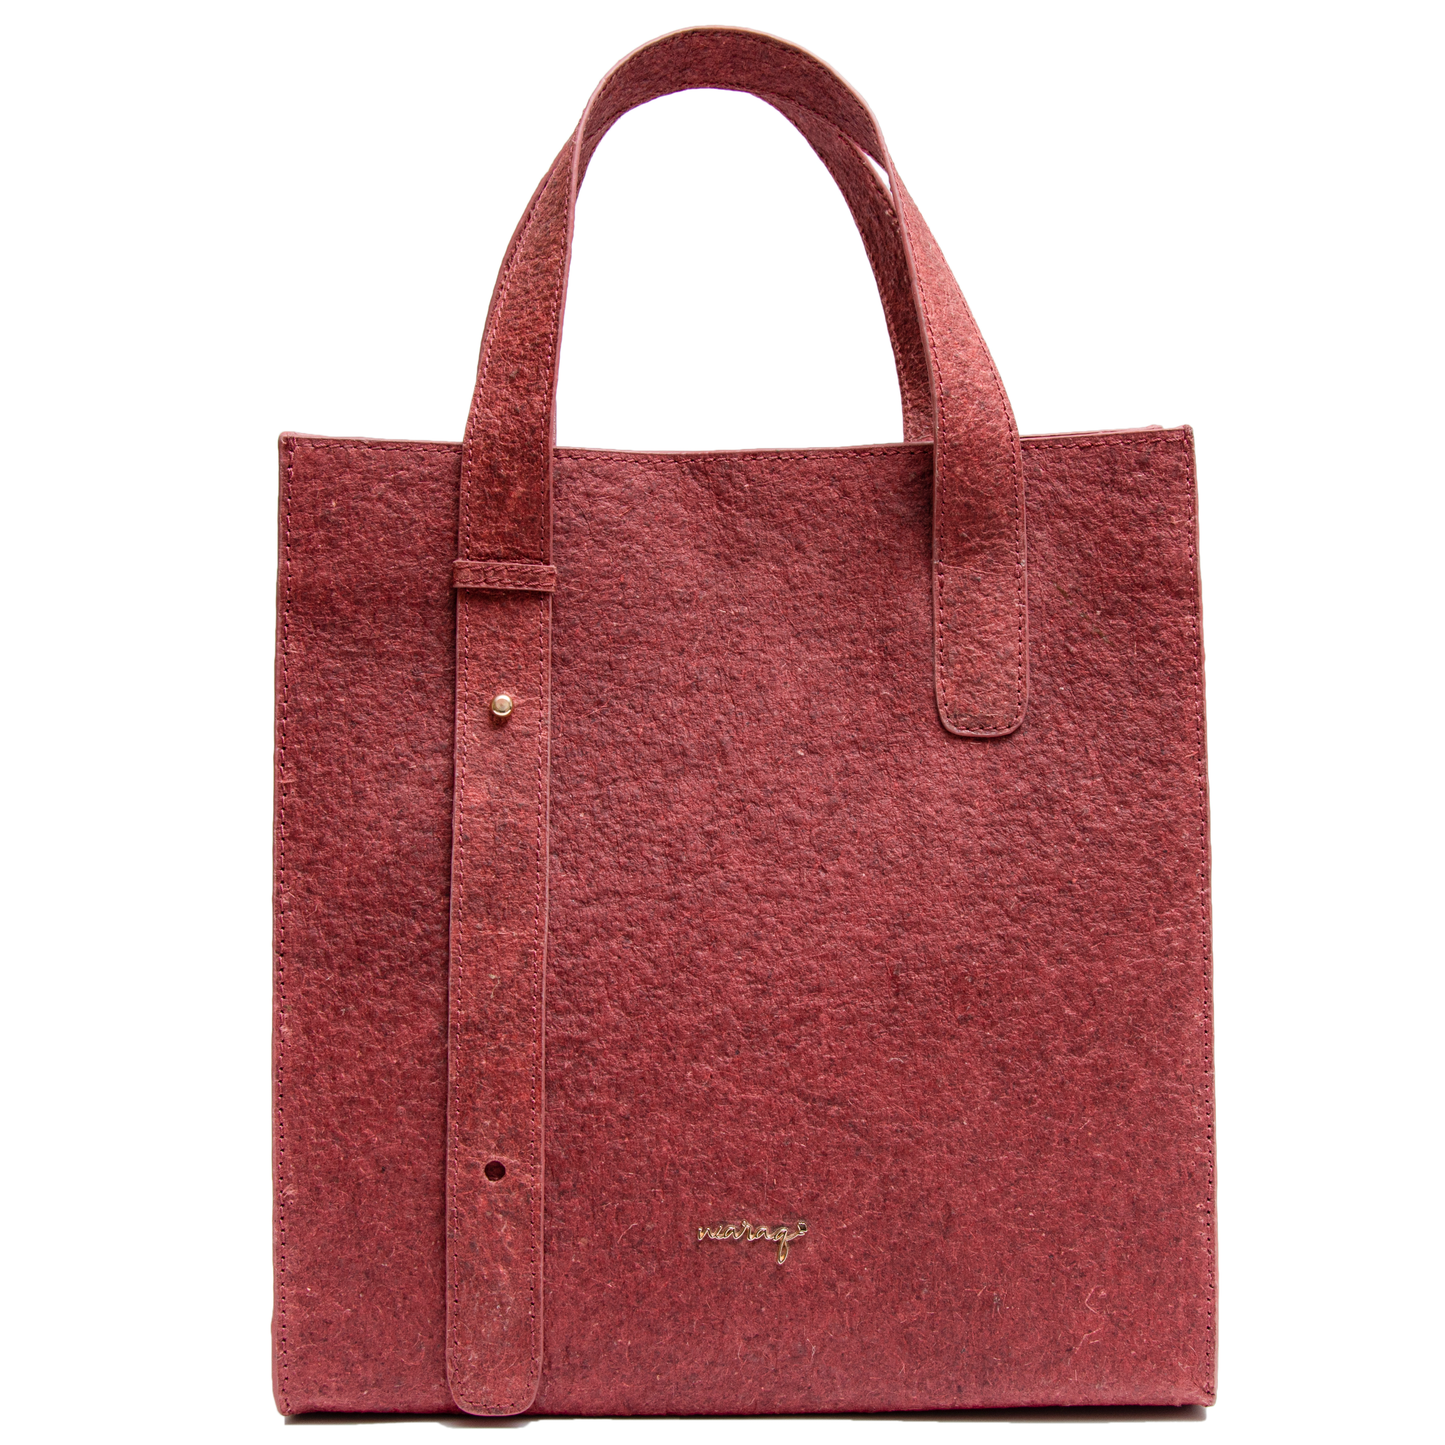  luxury hand bag, made with environment friendly, cruelty free vegan material, making it a sustainable shoppers' bag and an ideal luxury gift